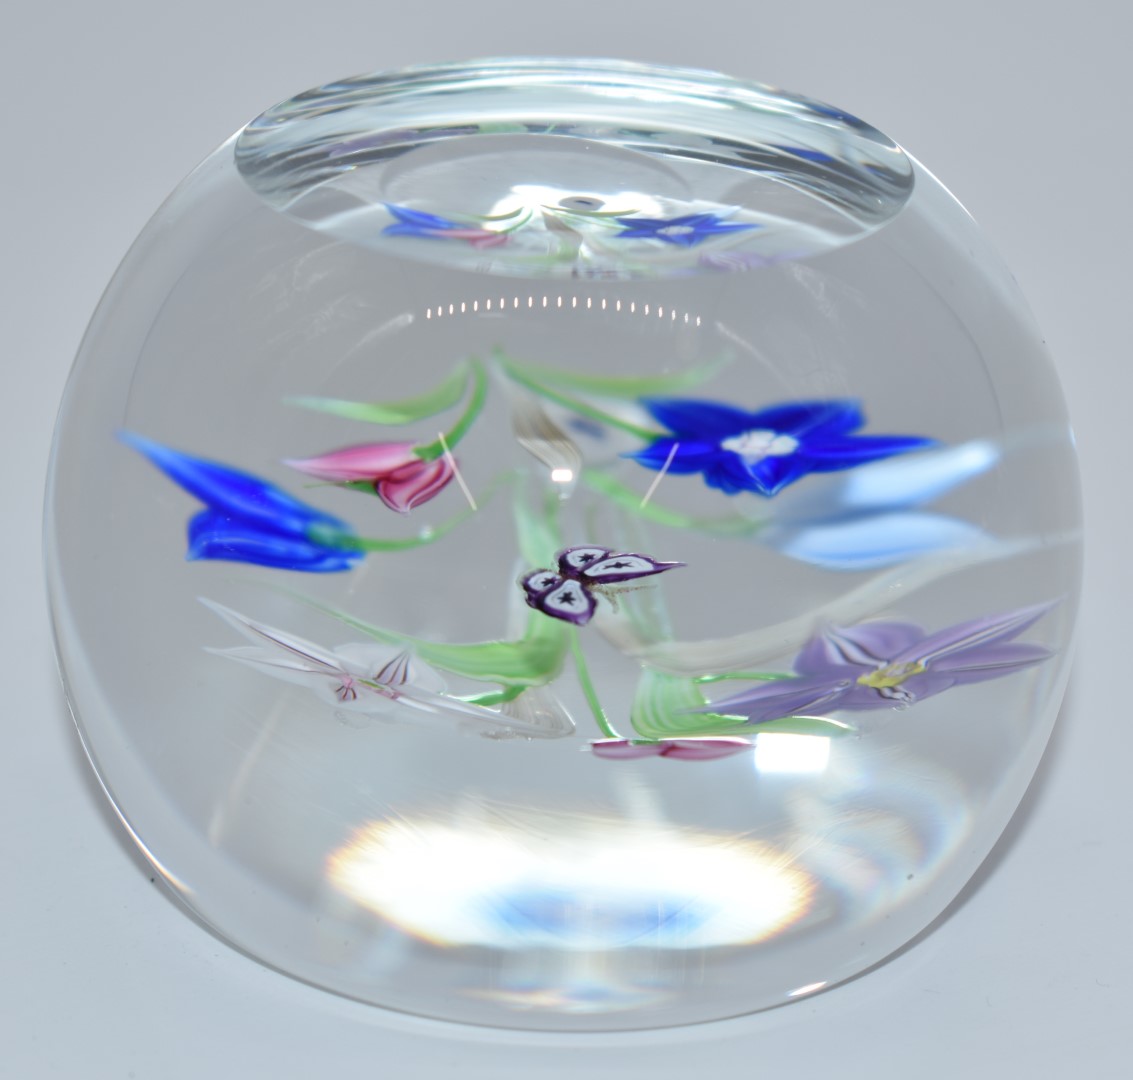 Caithness Whitefriars signed limited edition 97/250 'Summer Garden' lampwork glass paperweight - Image 2 of 3